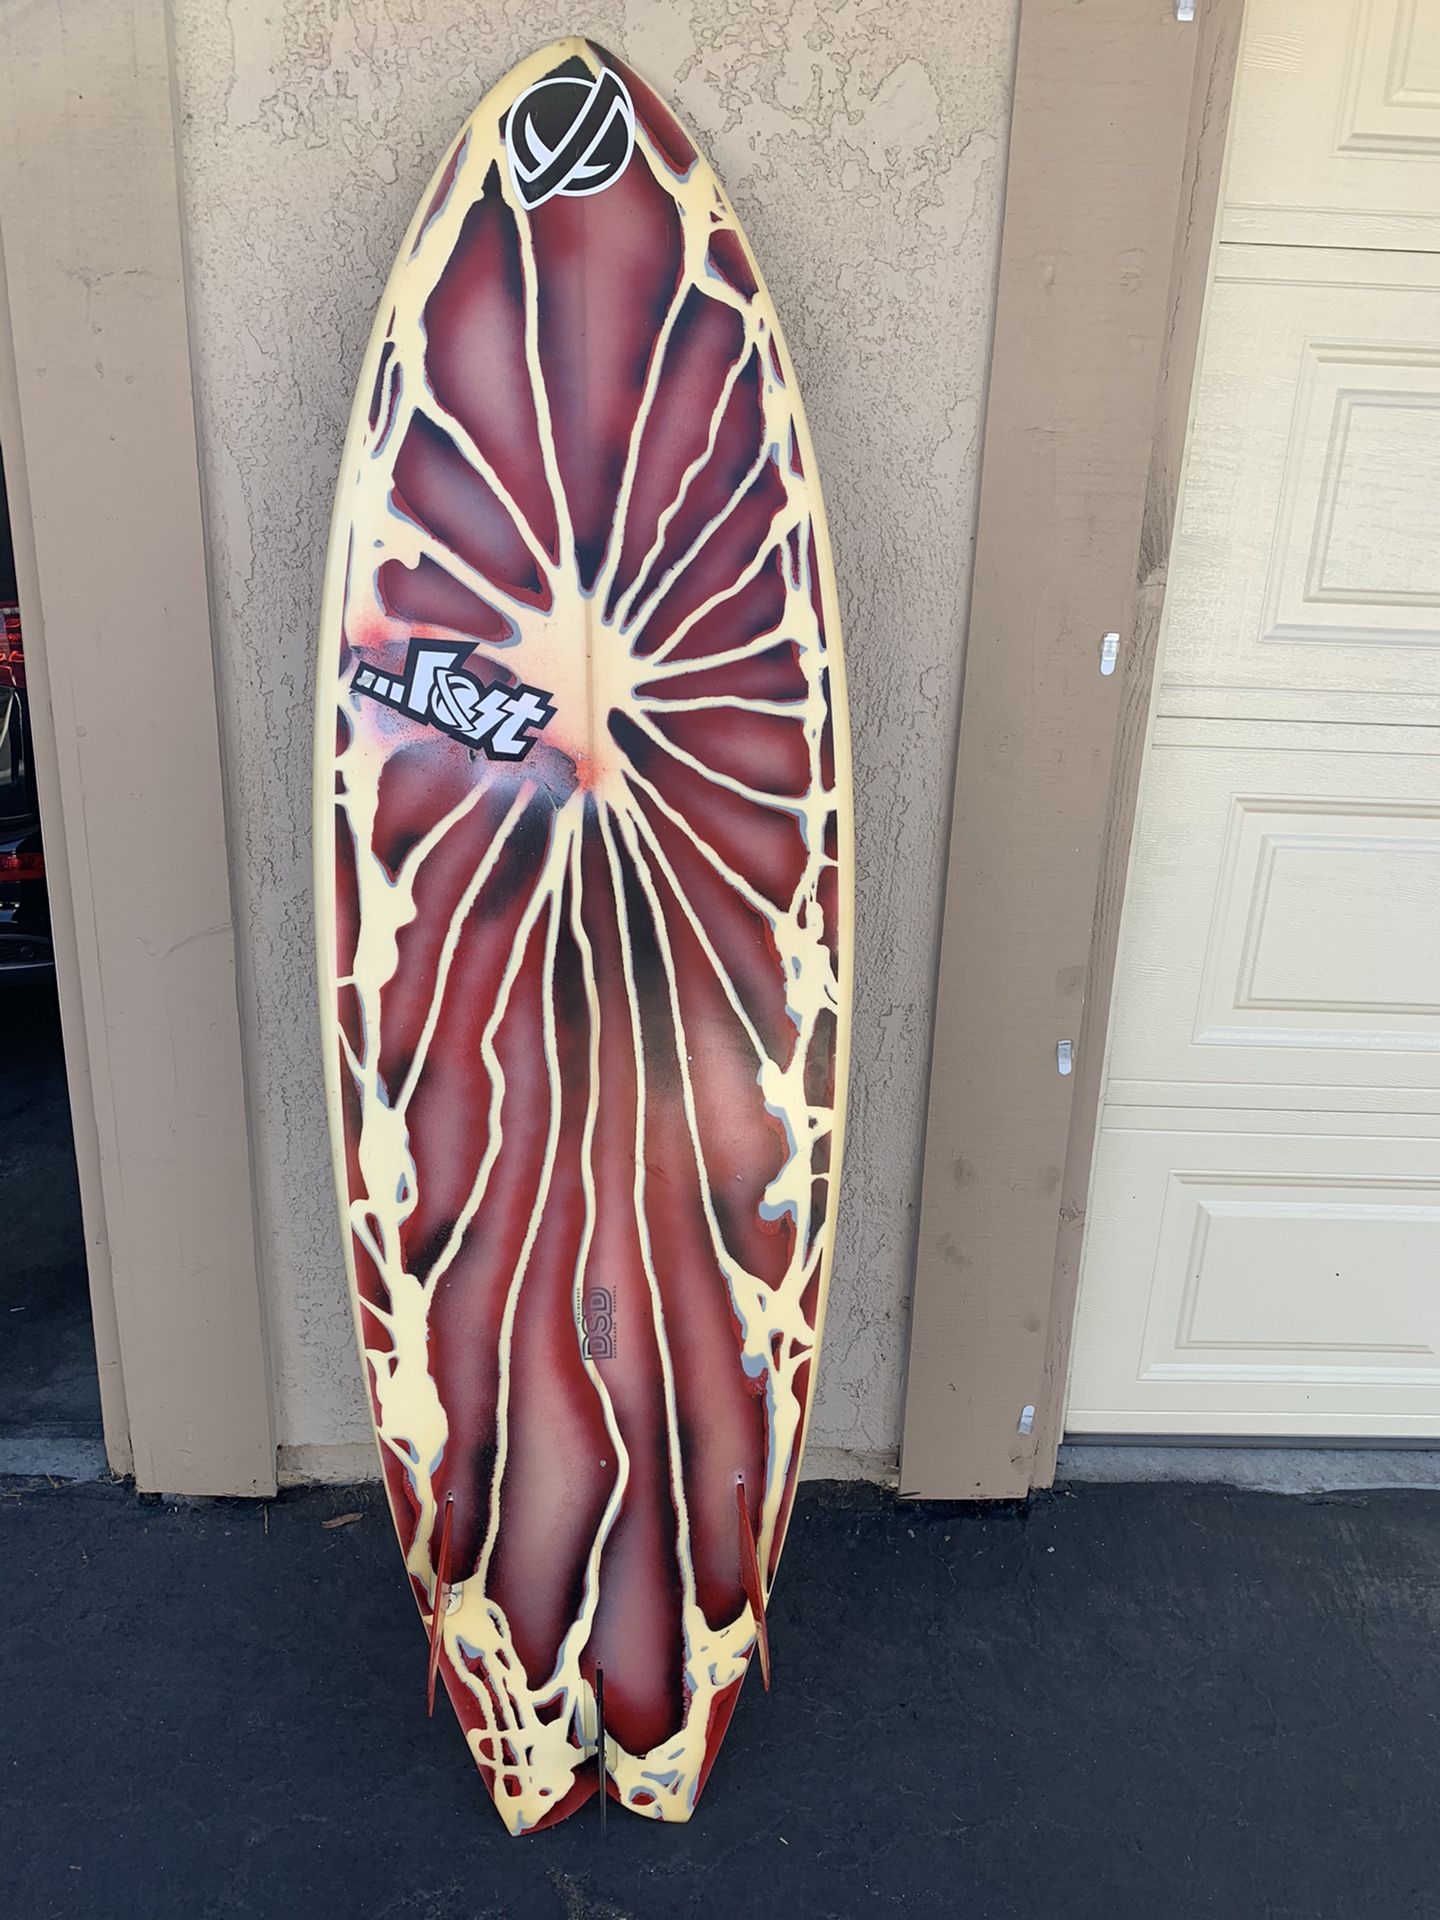 Proctor Surfboard “lil rascal”- Excellent Condition!!